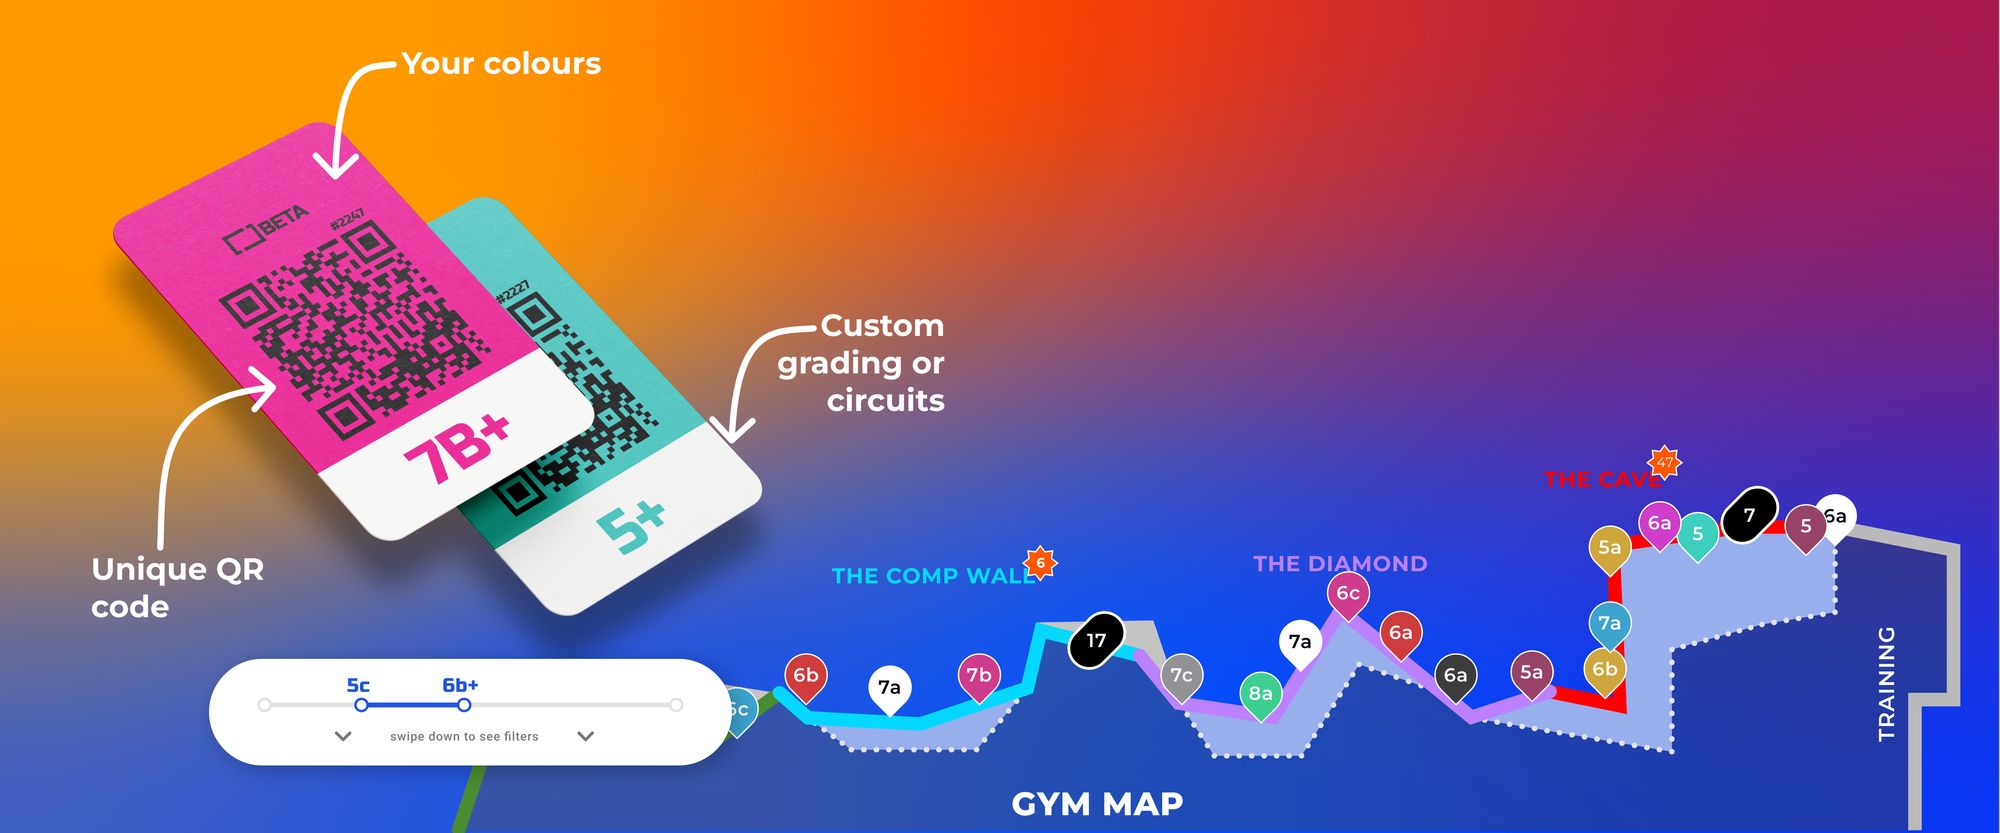 TapTags & Gym Maps